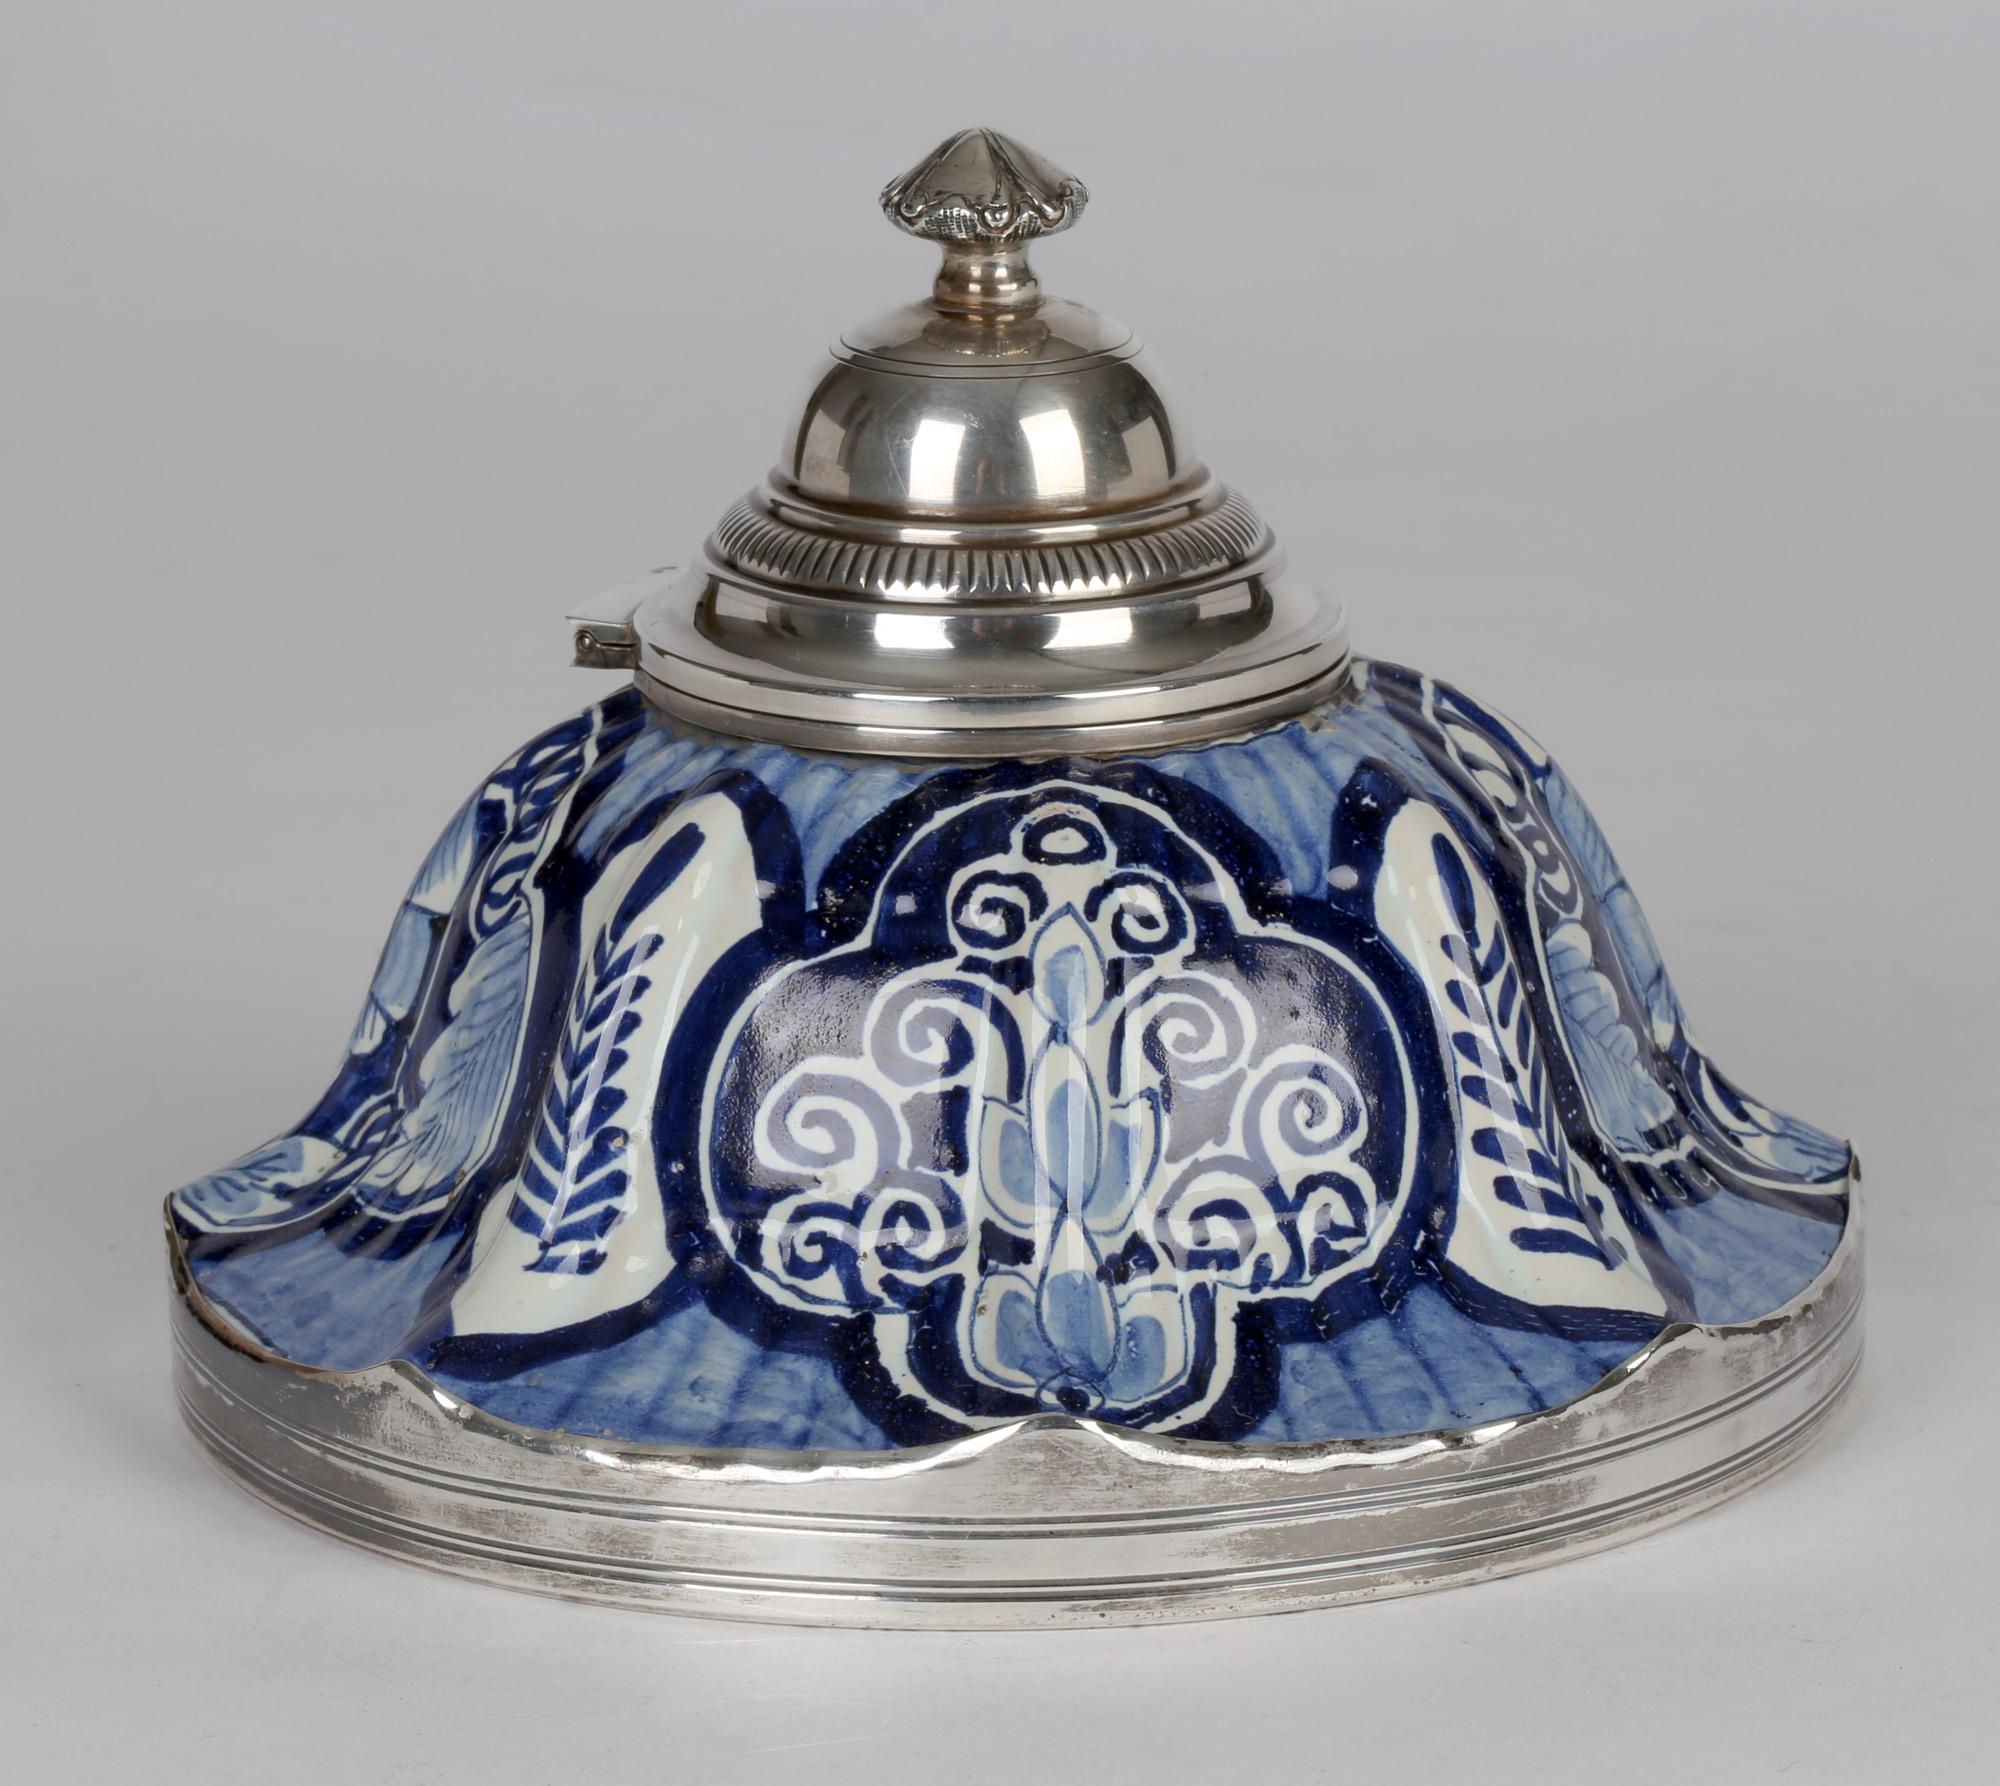 An unusual French silver mounted faience pottery inkwell hand painted with blue and white designs dating from the 19th century. The domed shape inkwell stands on a rounded base with a quality silver rim with a shaped and ribbed body decorated with